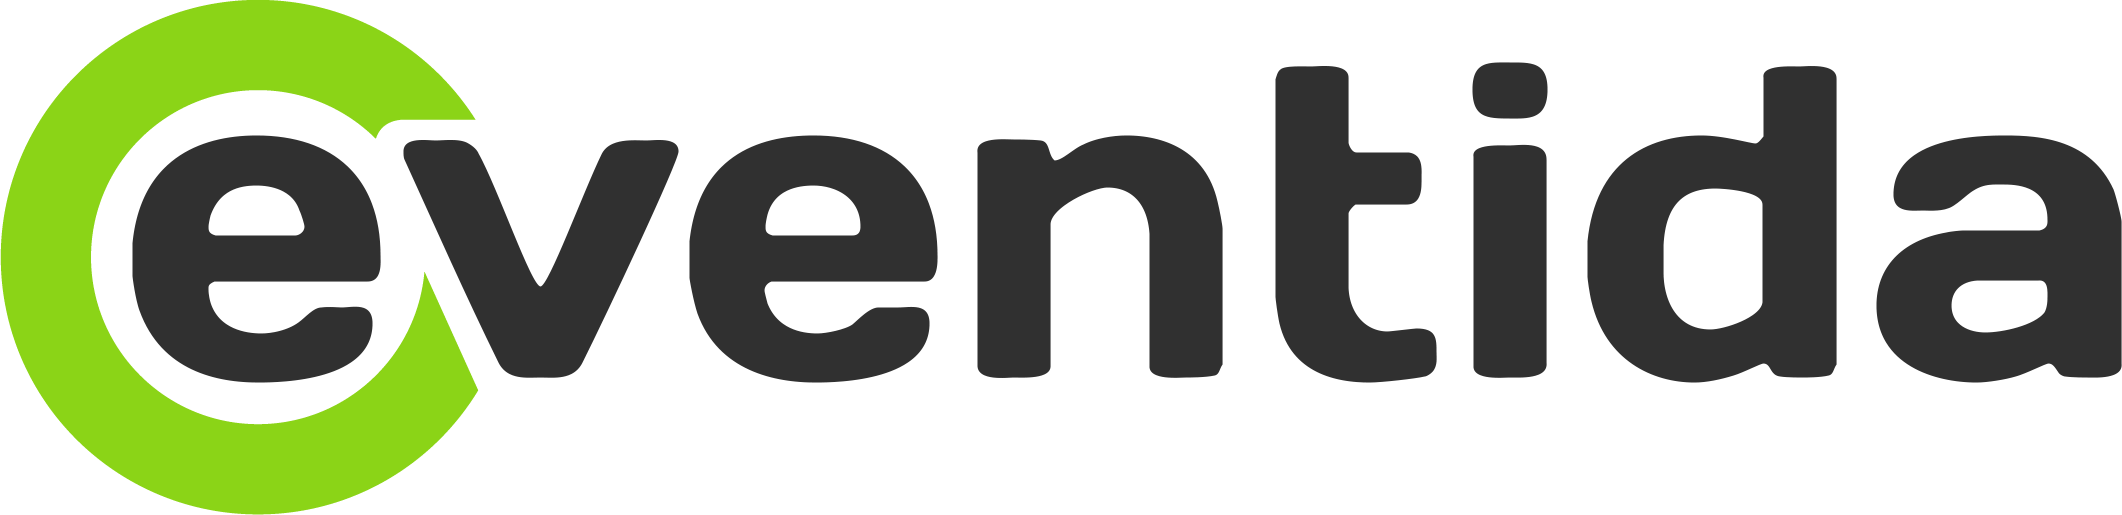 Green and gray logo spelling out Eventida